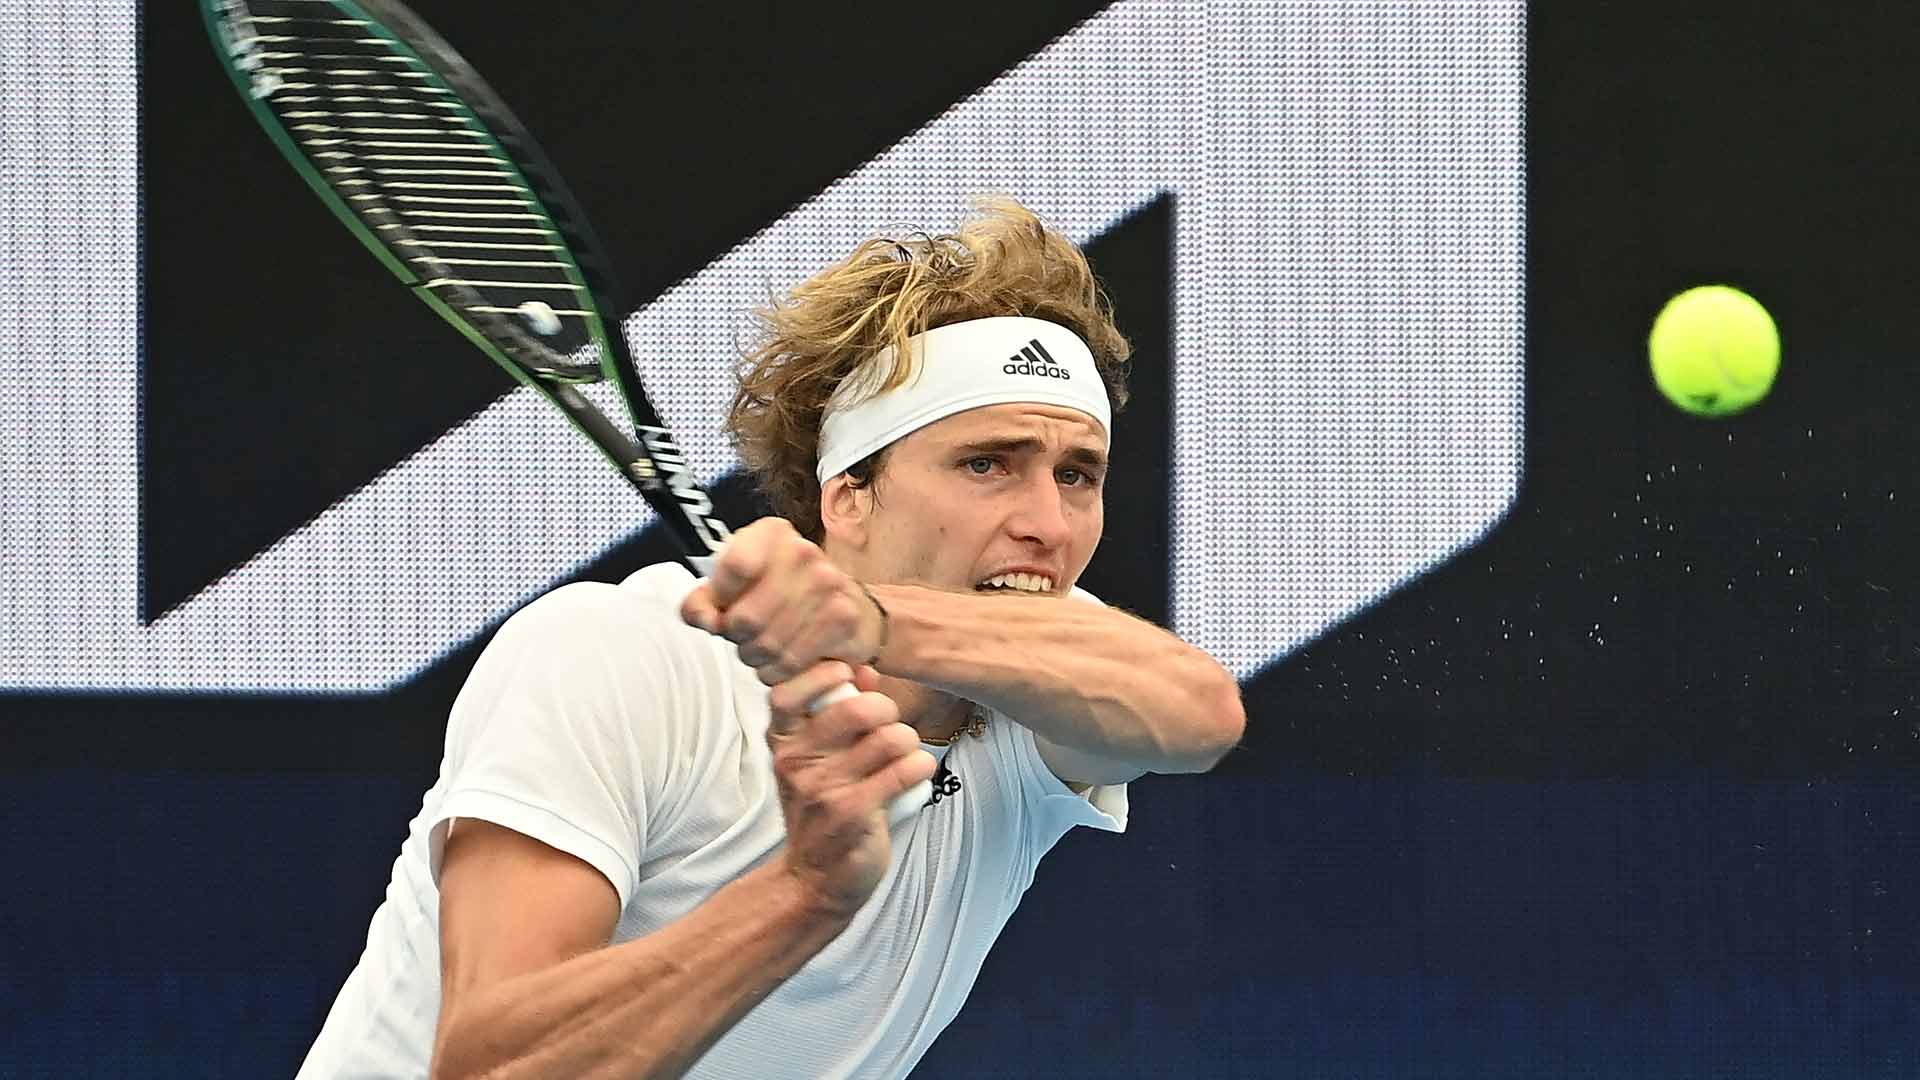 Alexander Zverev records his second consecutive straight-sets win at ATP Cup, defeating Taylor Fritz 6-4, 6-4.